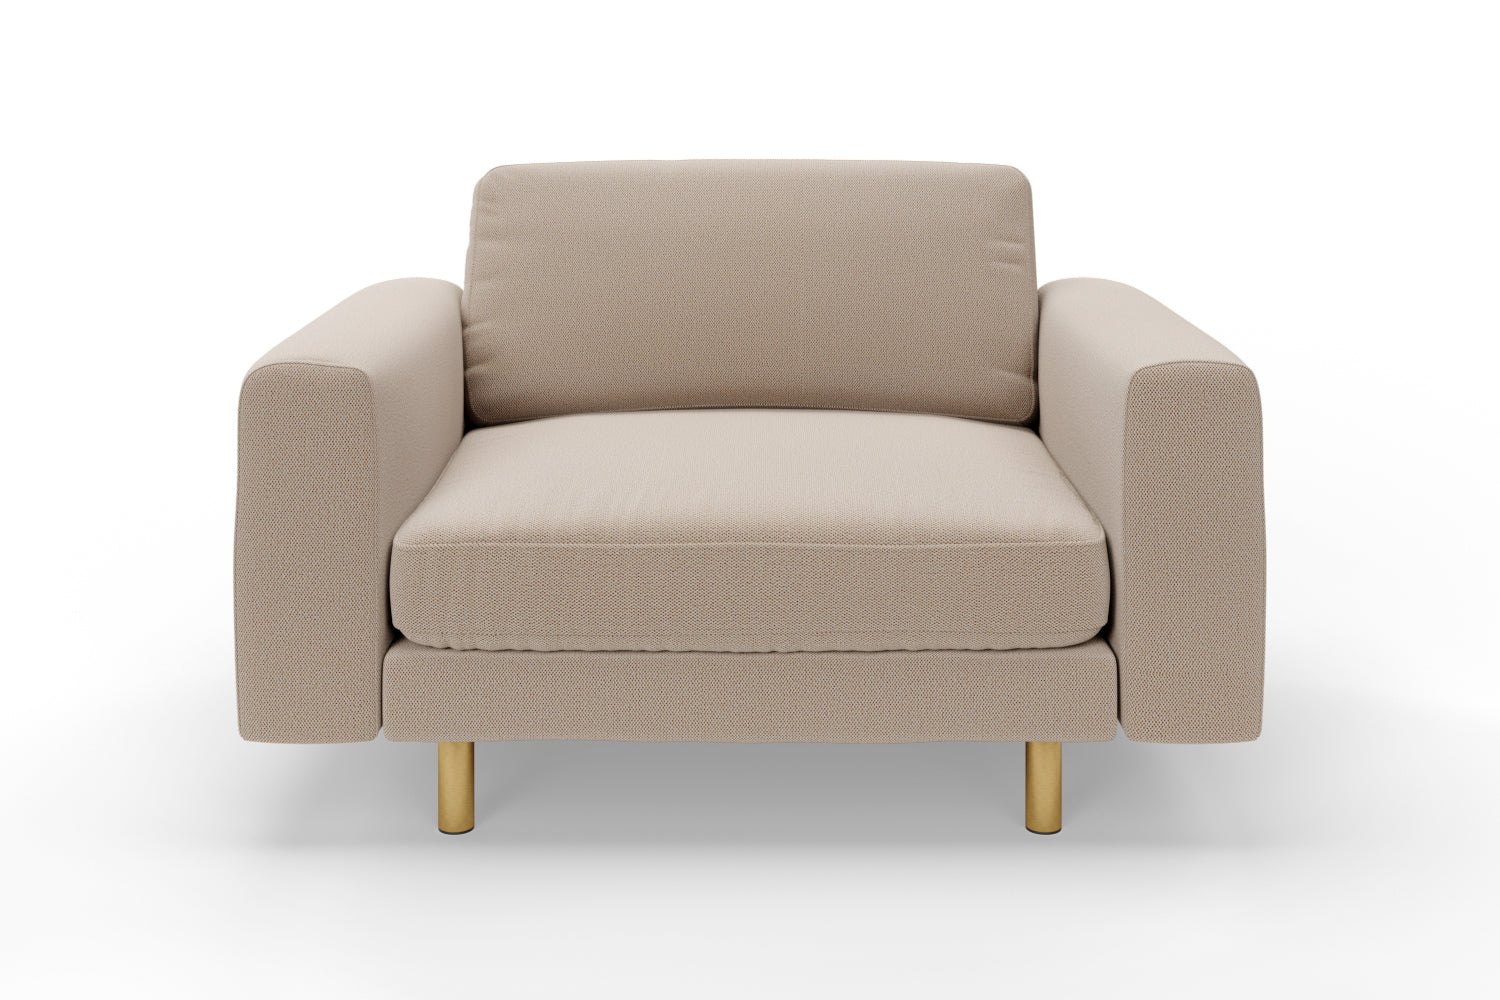 SNUG | The Big Chill 1.5 Seater Snuggler in Oatmeal variant_40414876041264